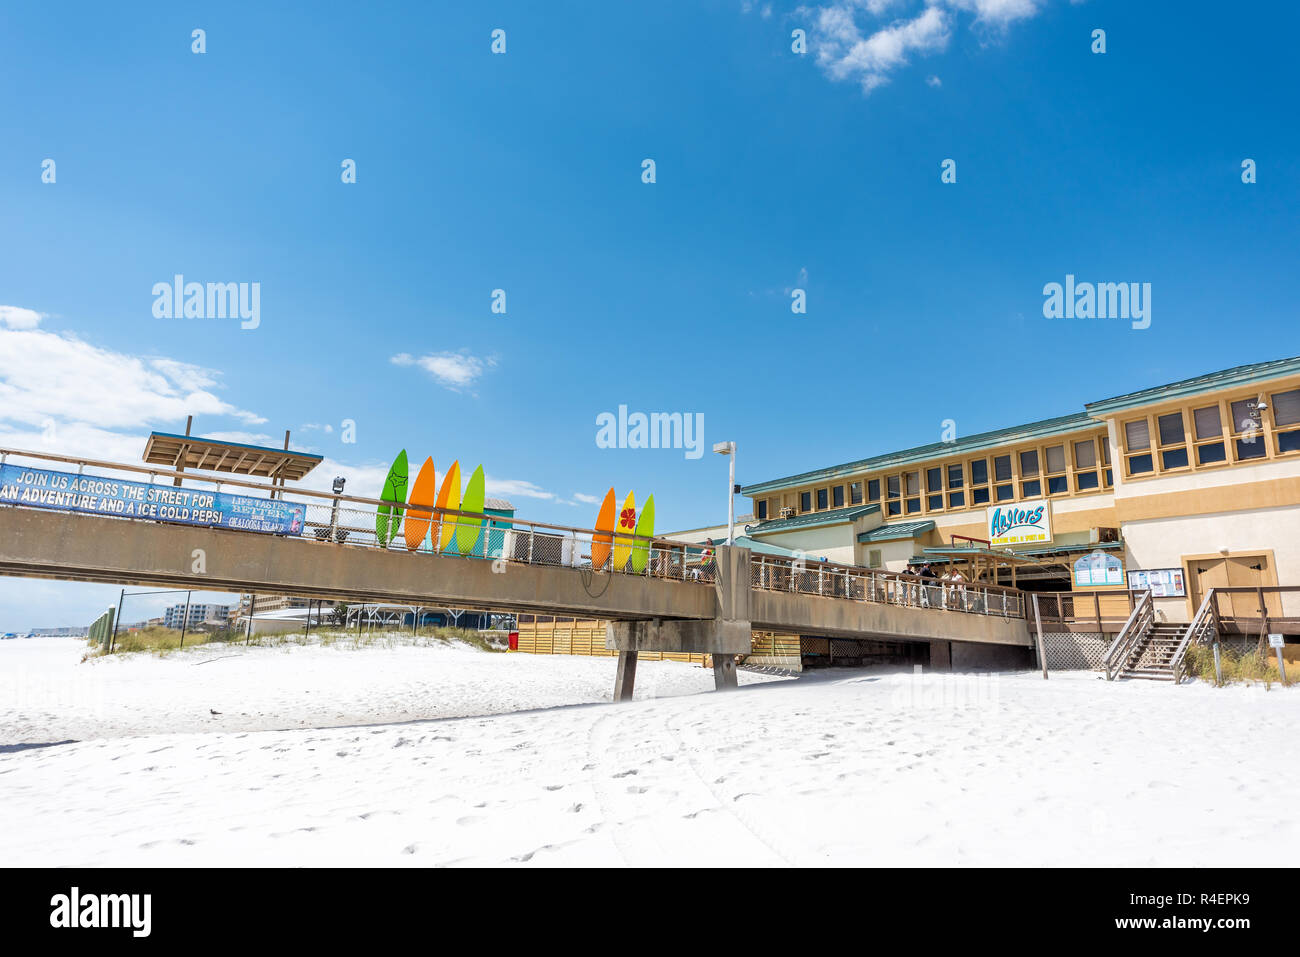 Fort Walton Beach, USA - April 24, 2018: Okaloosa Island fishing pier in Florida in Panhandle, Gulf of Mexico during sunny day, colorful surfboards, r Stock Photo